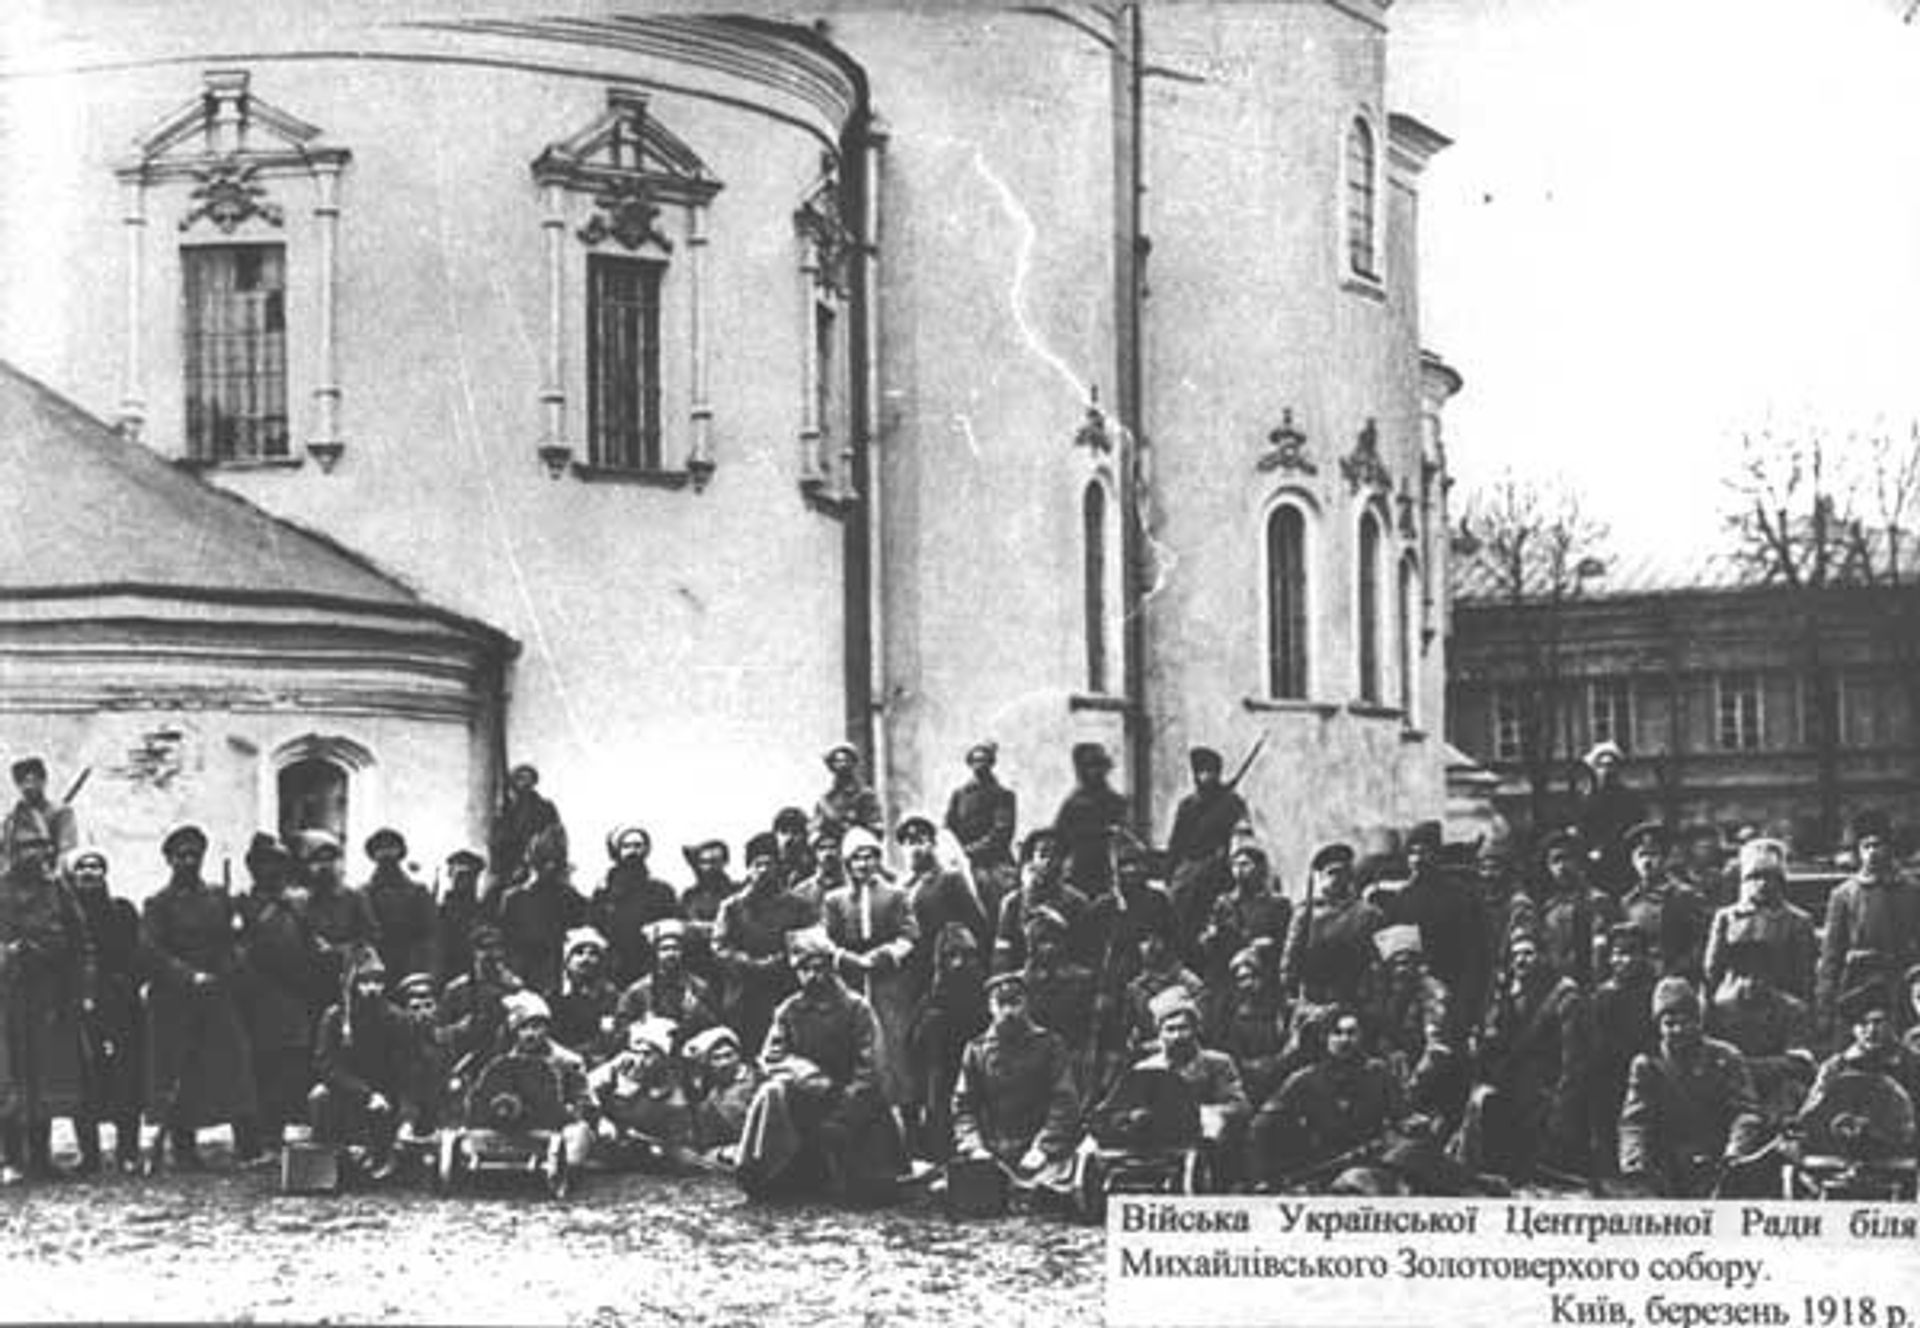 Ukrainians fought for their independence against the Bolsheviks between 1917 and 1921 (Pictured: Soldiers of the Ukrainian National Army in front of Saint Michael's Golden-Domed Monastery in Kyiv)